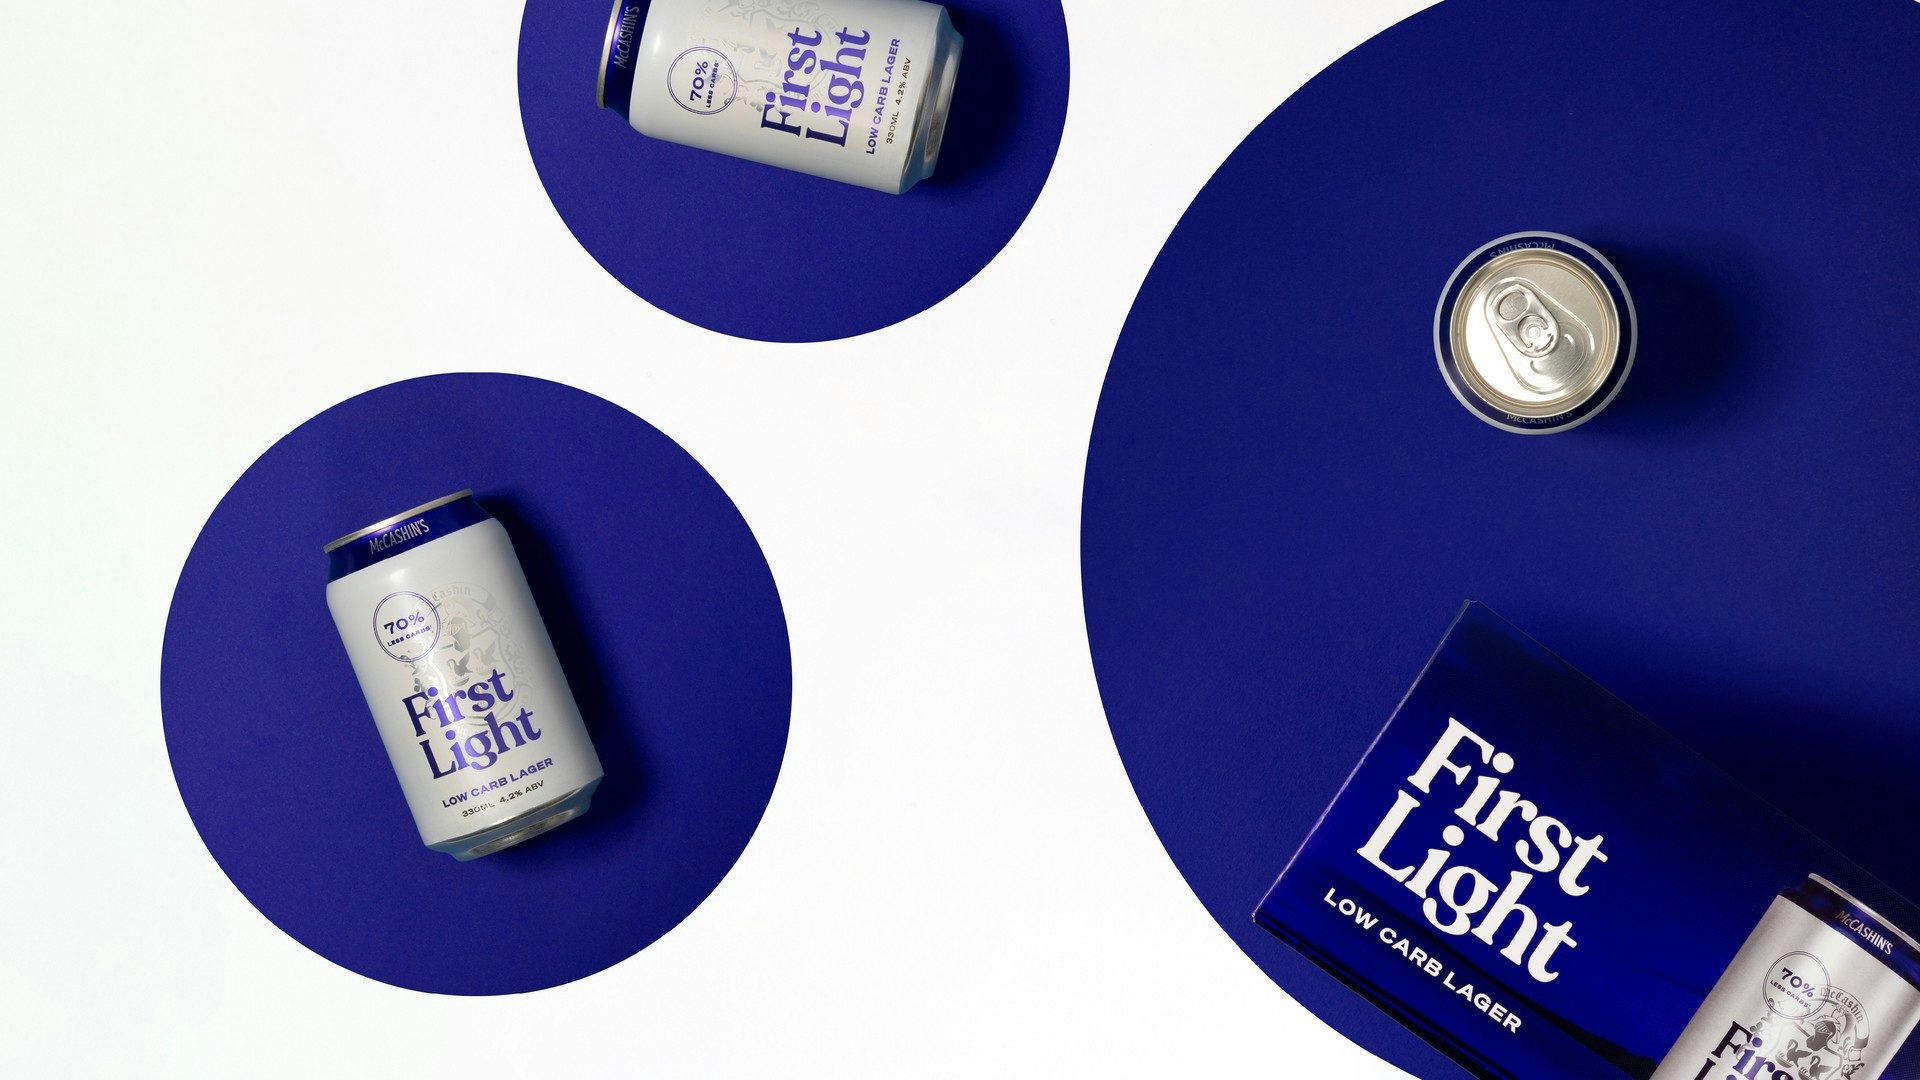 First Light branded carton and cans